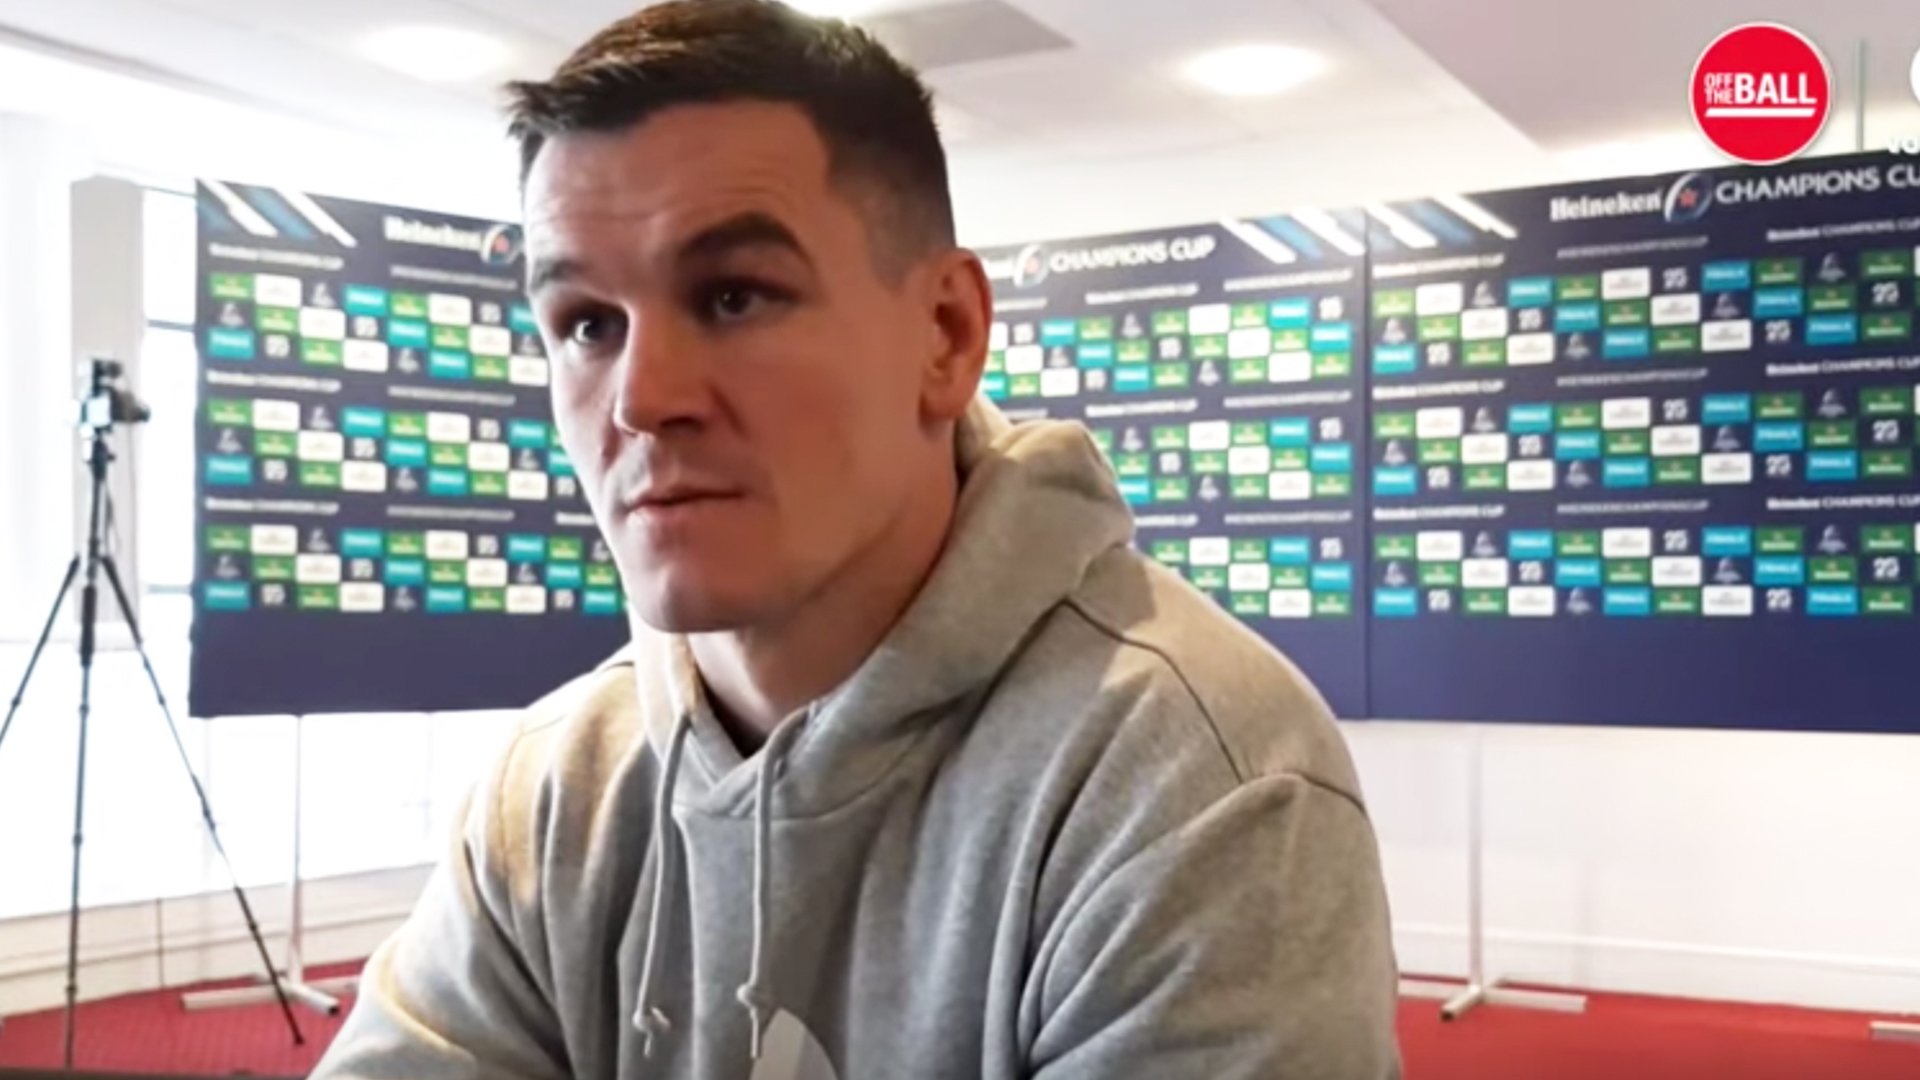 Johnny Sexton interview turns awkward when asked about the Rugby World Cup